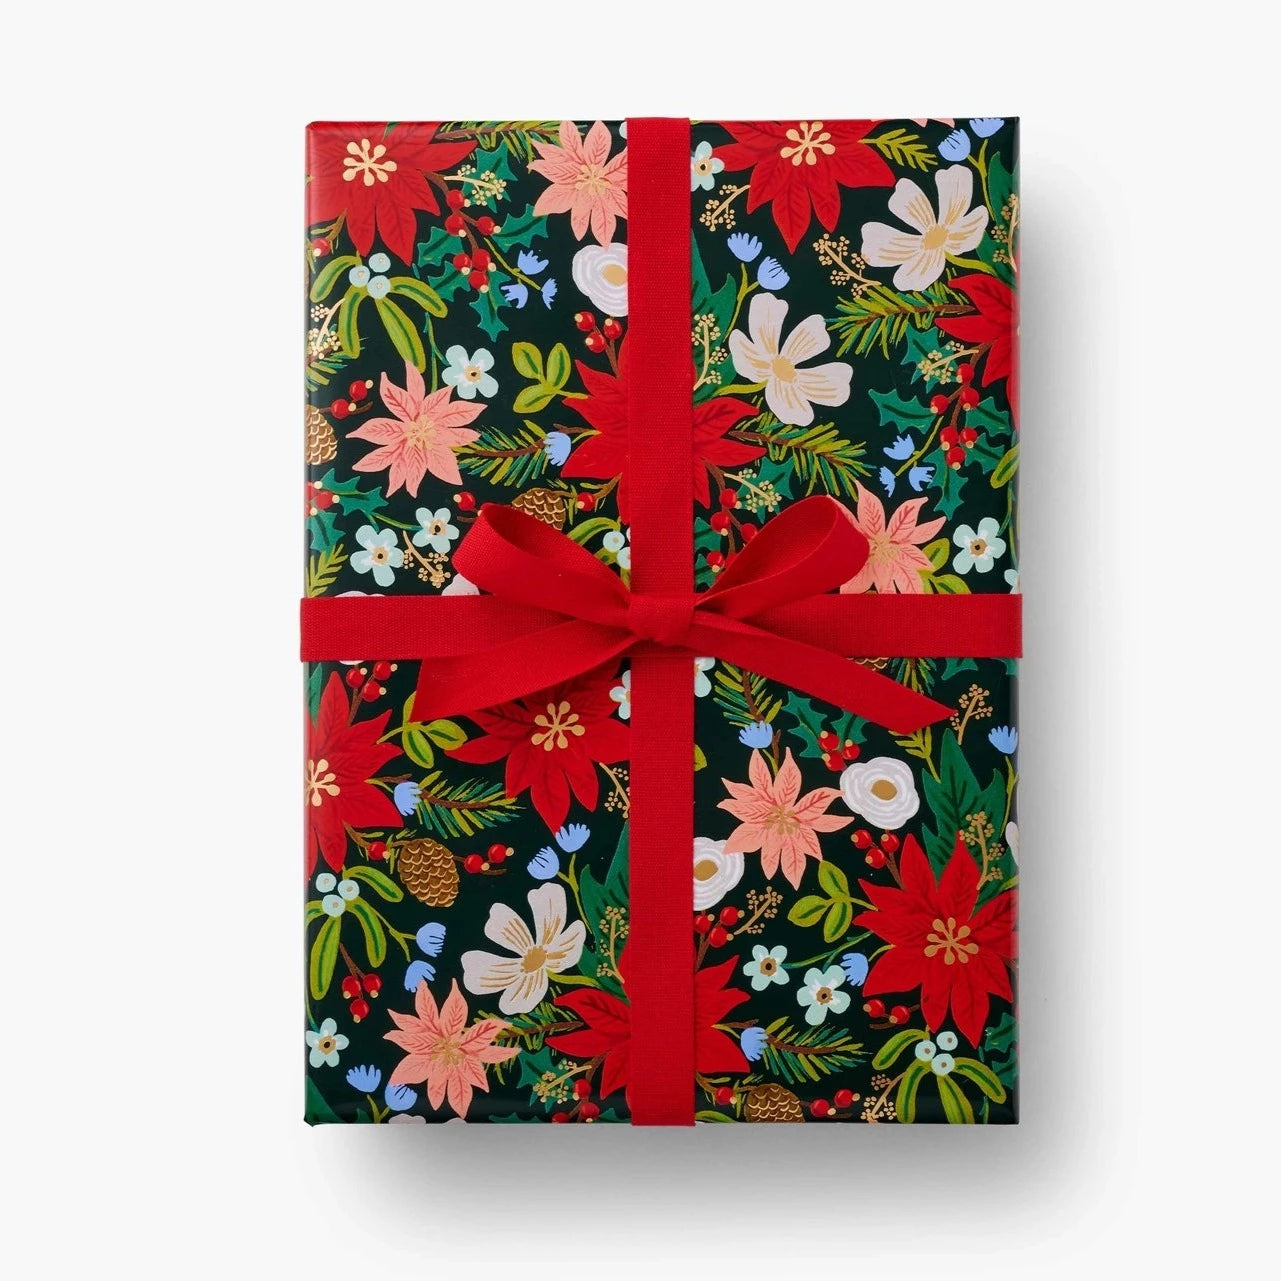 Poinsettia Wrapping Roll